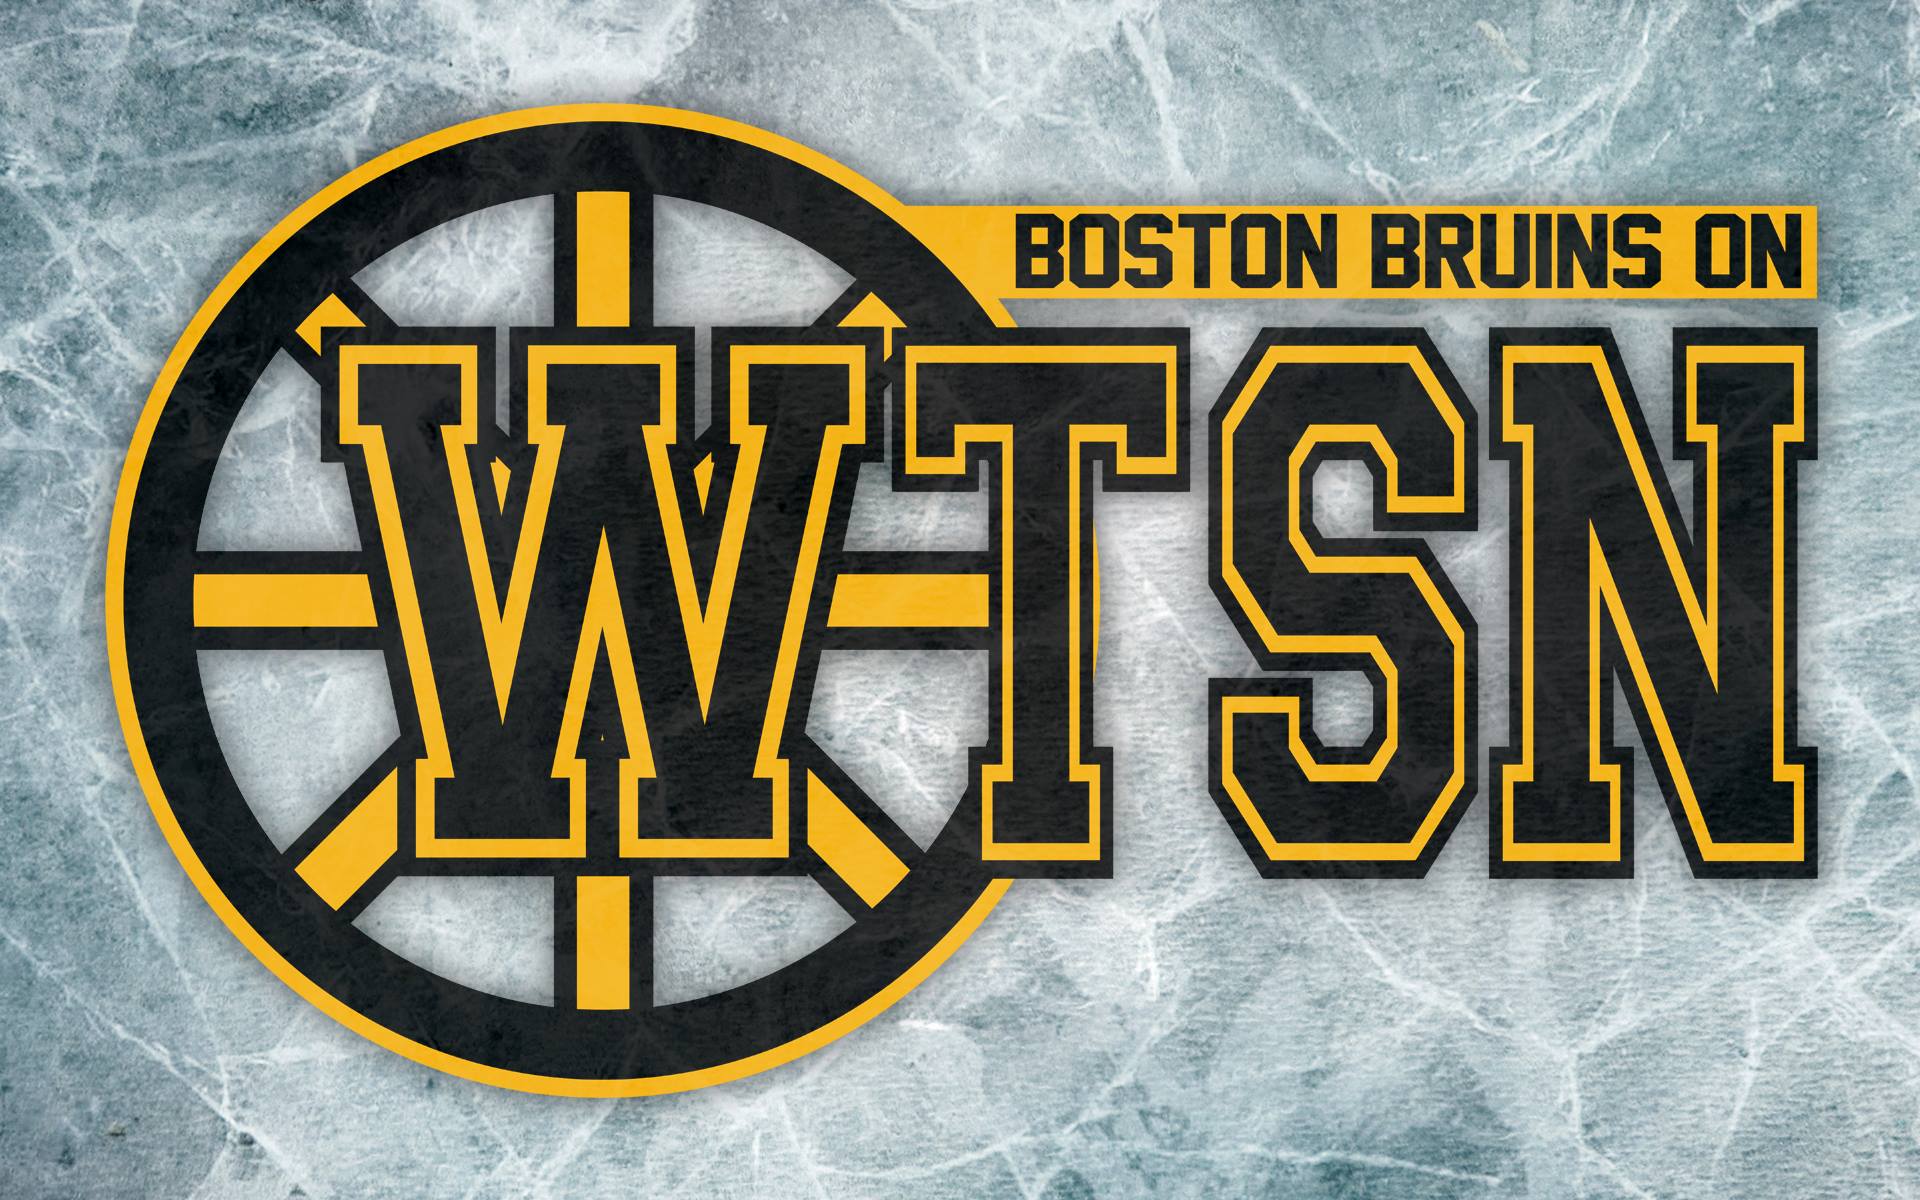 WTSN is the Seacoast Home For Boston Bruins Hockey